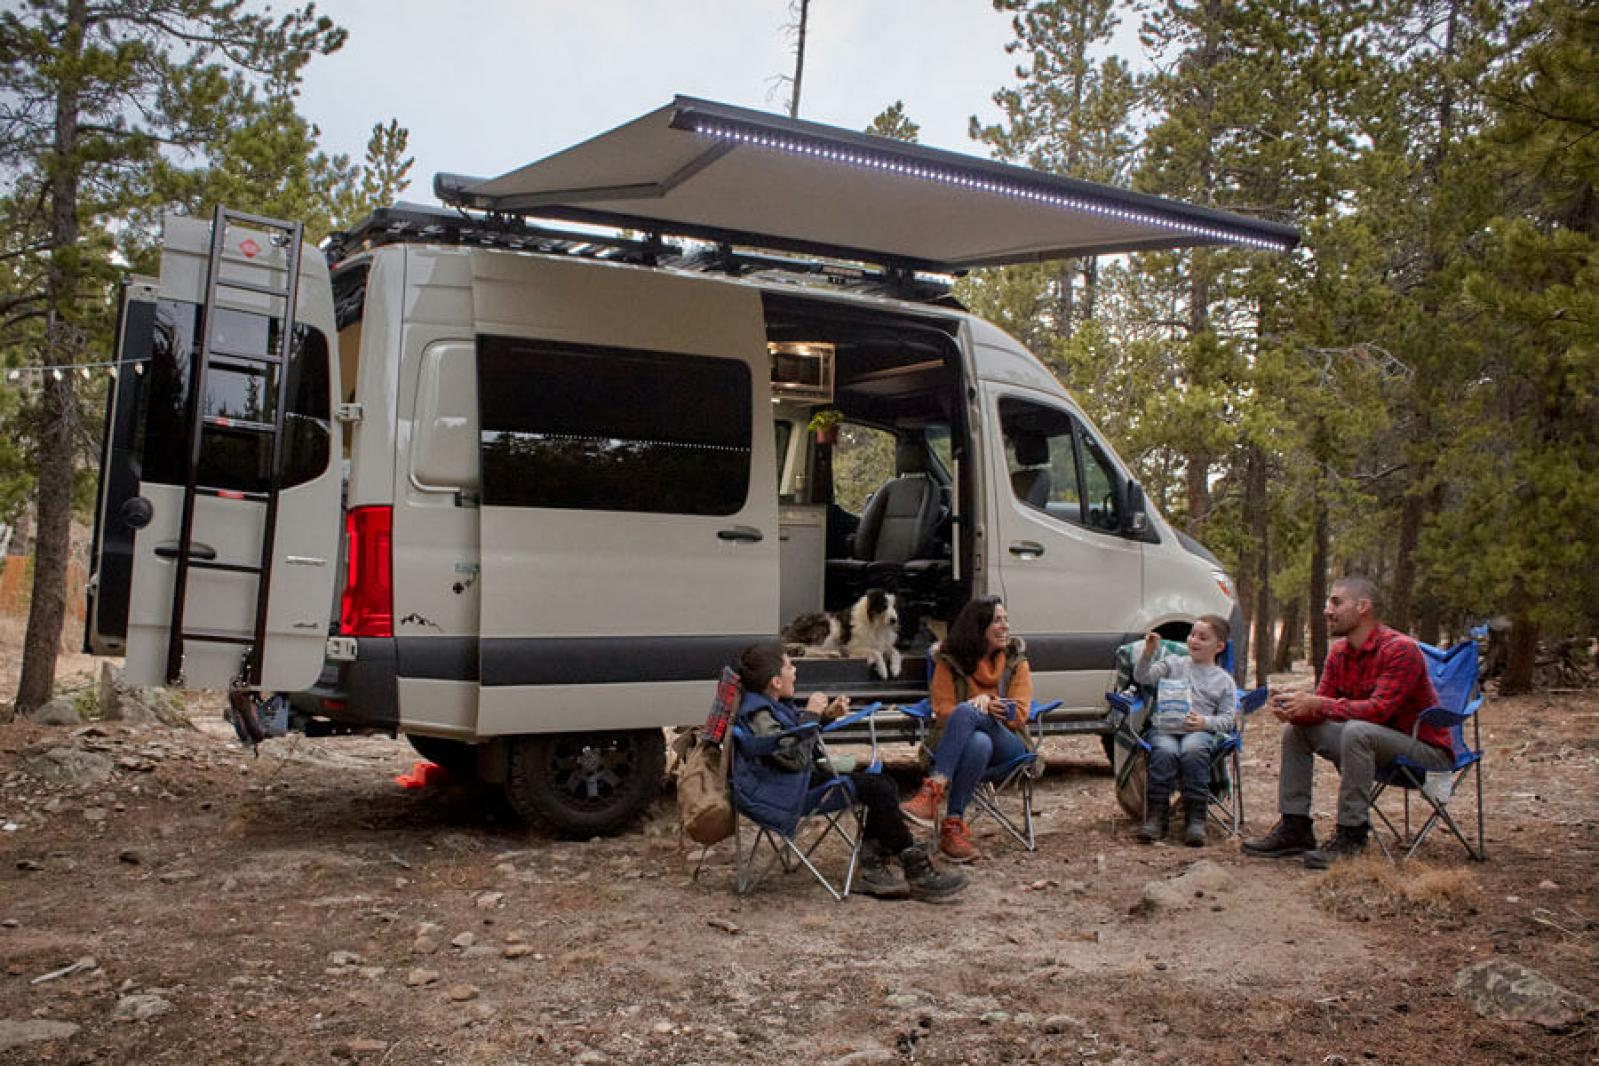 A family outdoors sitting in chairs in front of an Antero Adventure Van